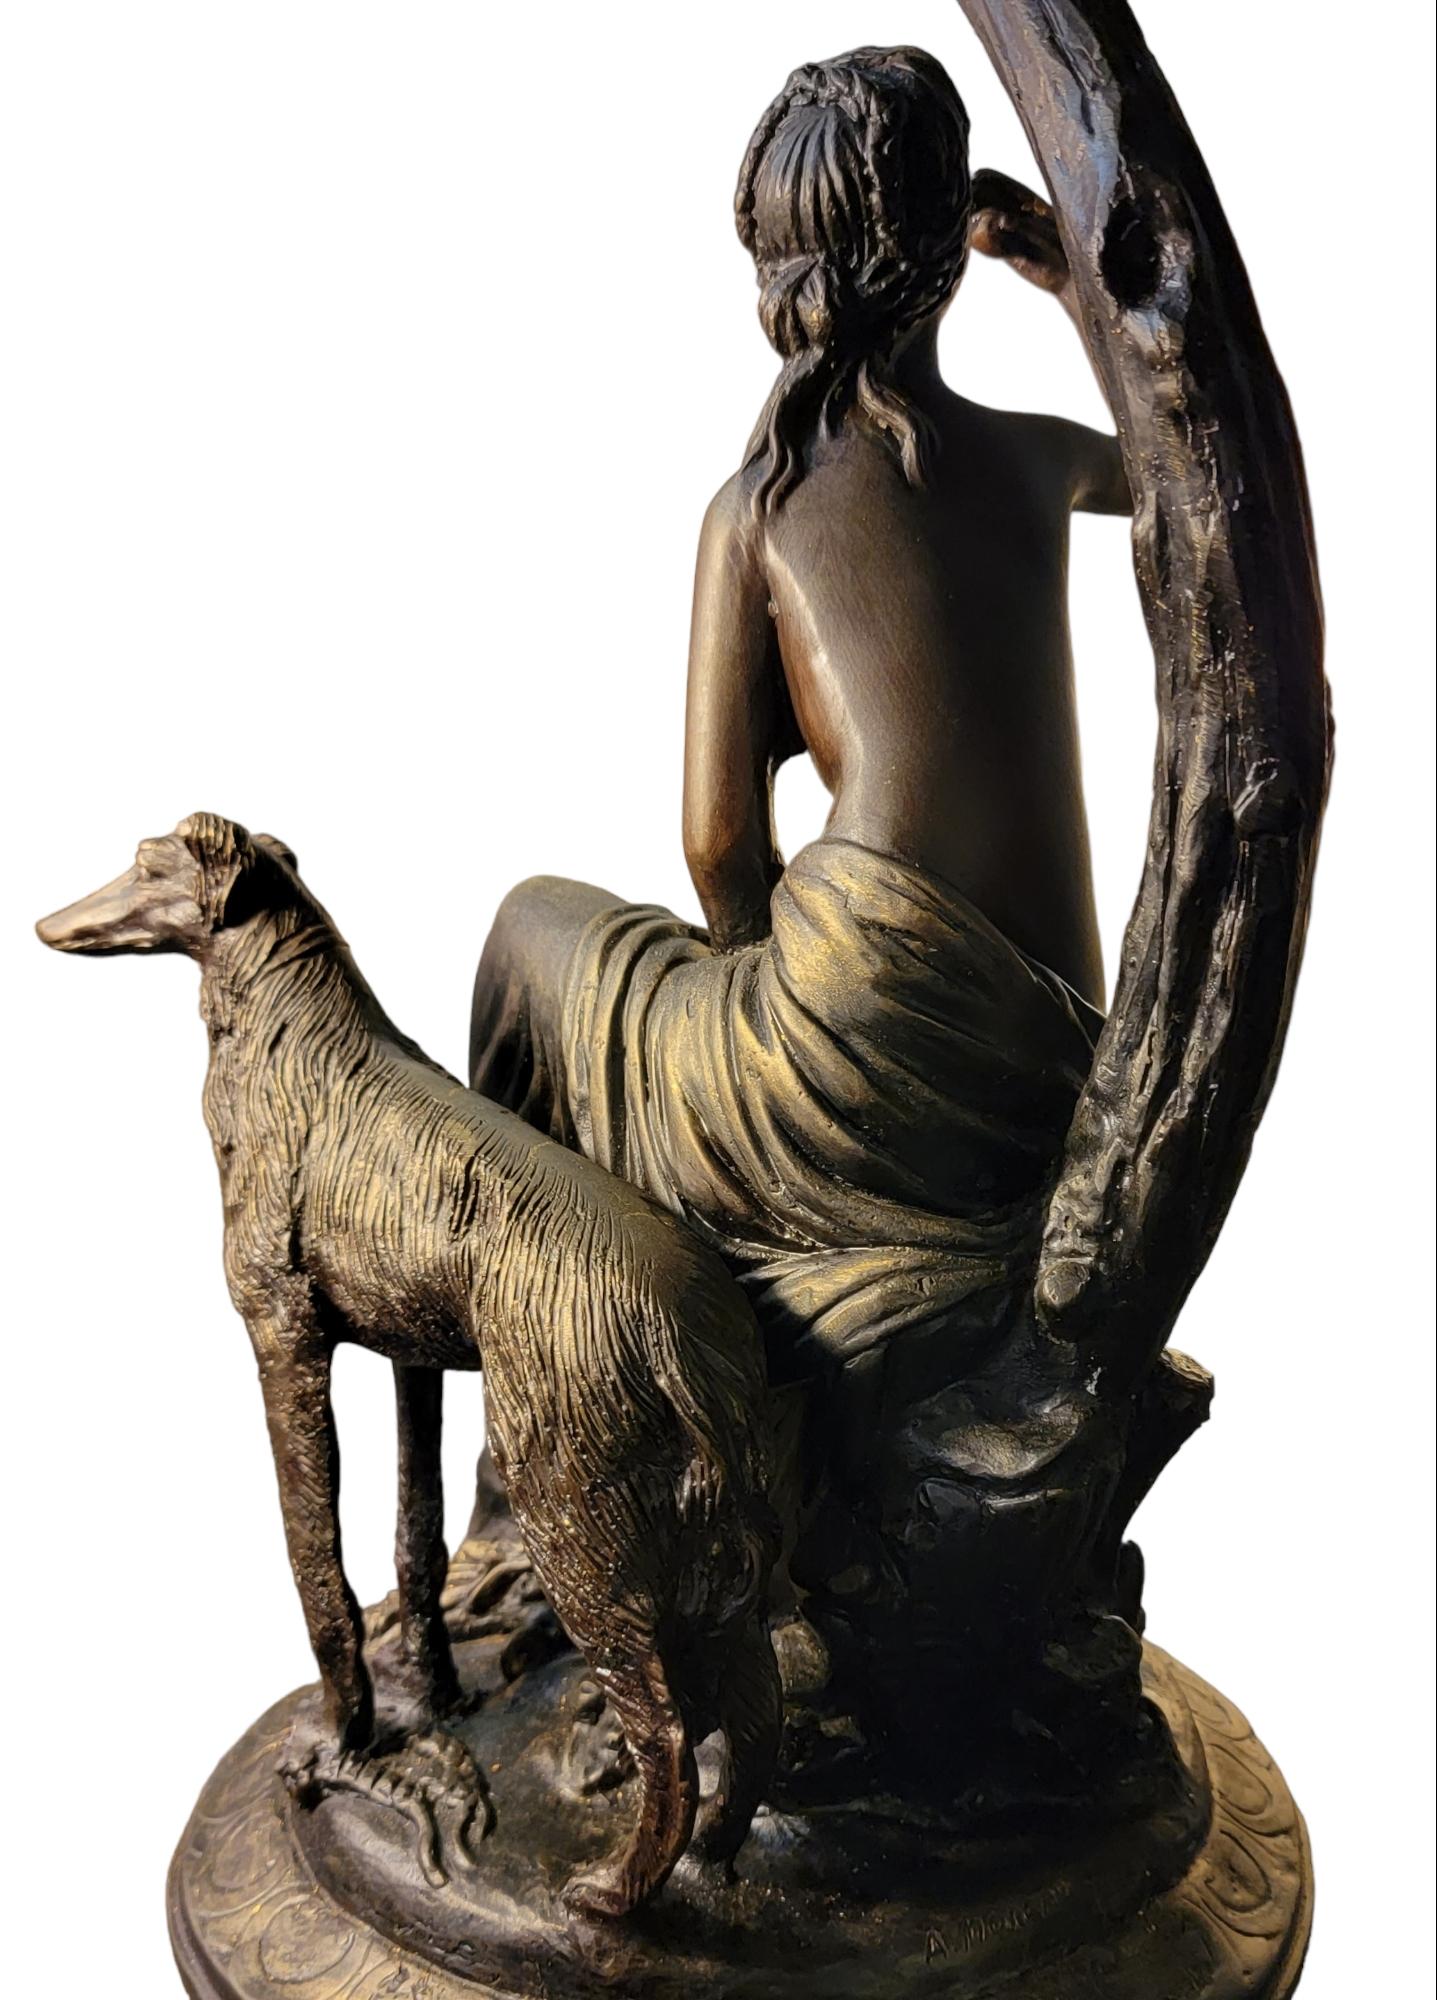 Art Novuea Bronze Center Piece Signed By A. Morgan. This wonderful centerpiece shows a wonderous free scene. 
The scene of a nide woman enjoying an apple white sitting under a tree next to her dog as the dog stands guard. The base of this